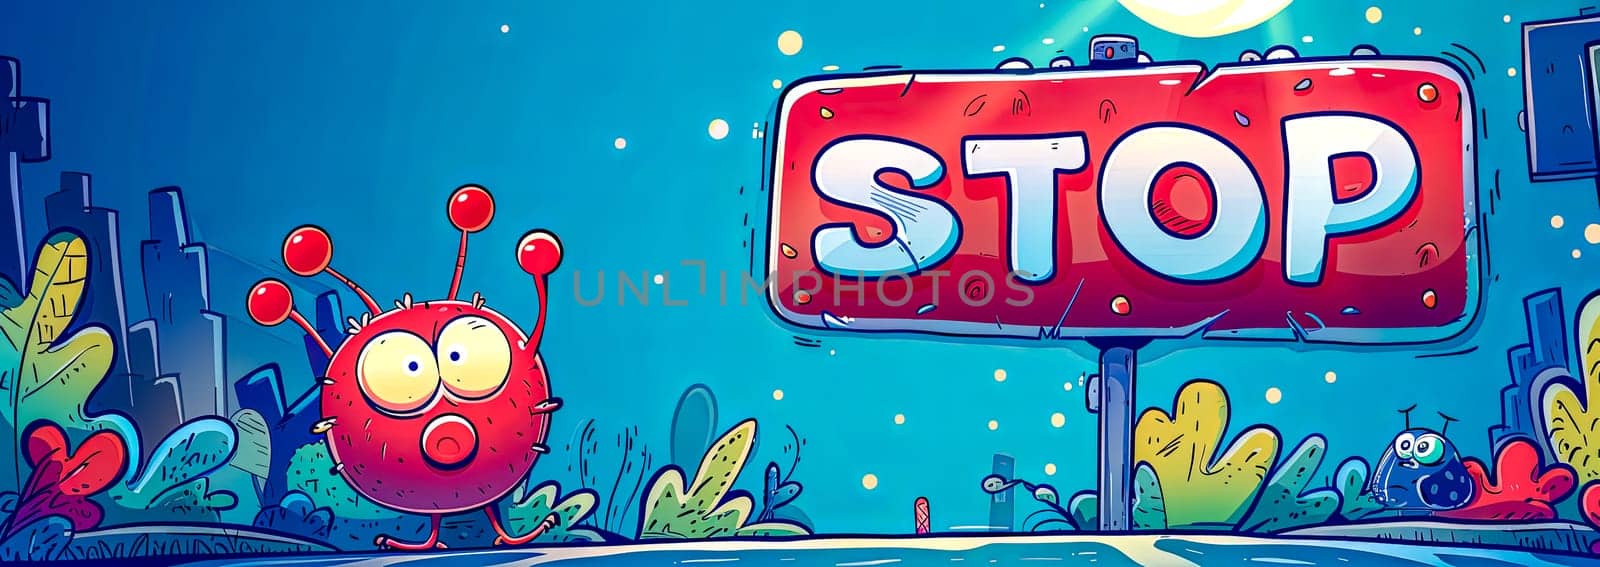 Cartoon alien encountering stop sign on road at night by Edophoto